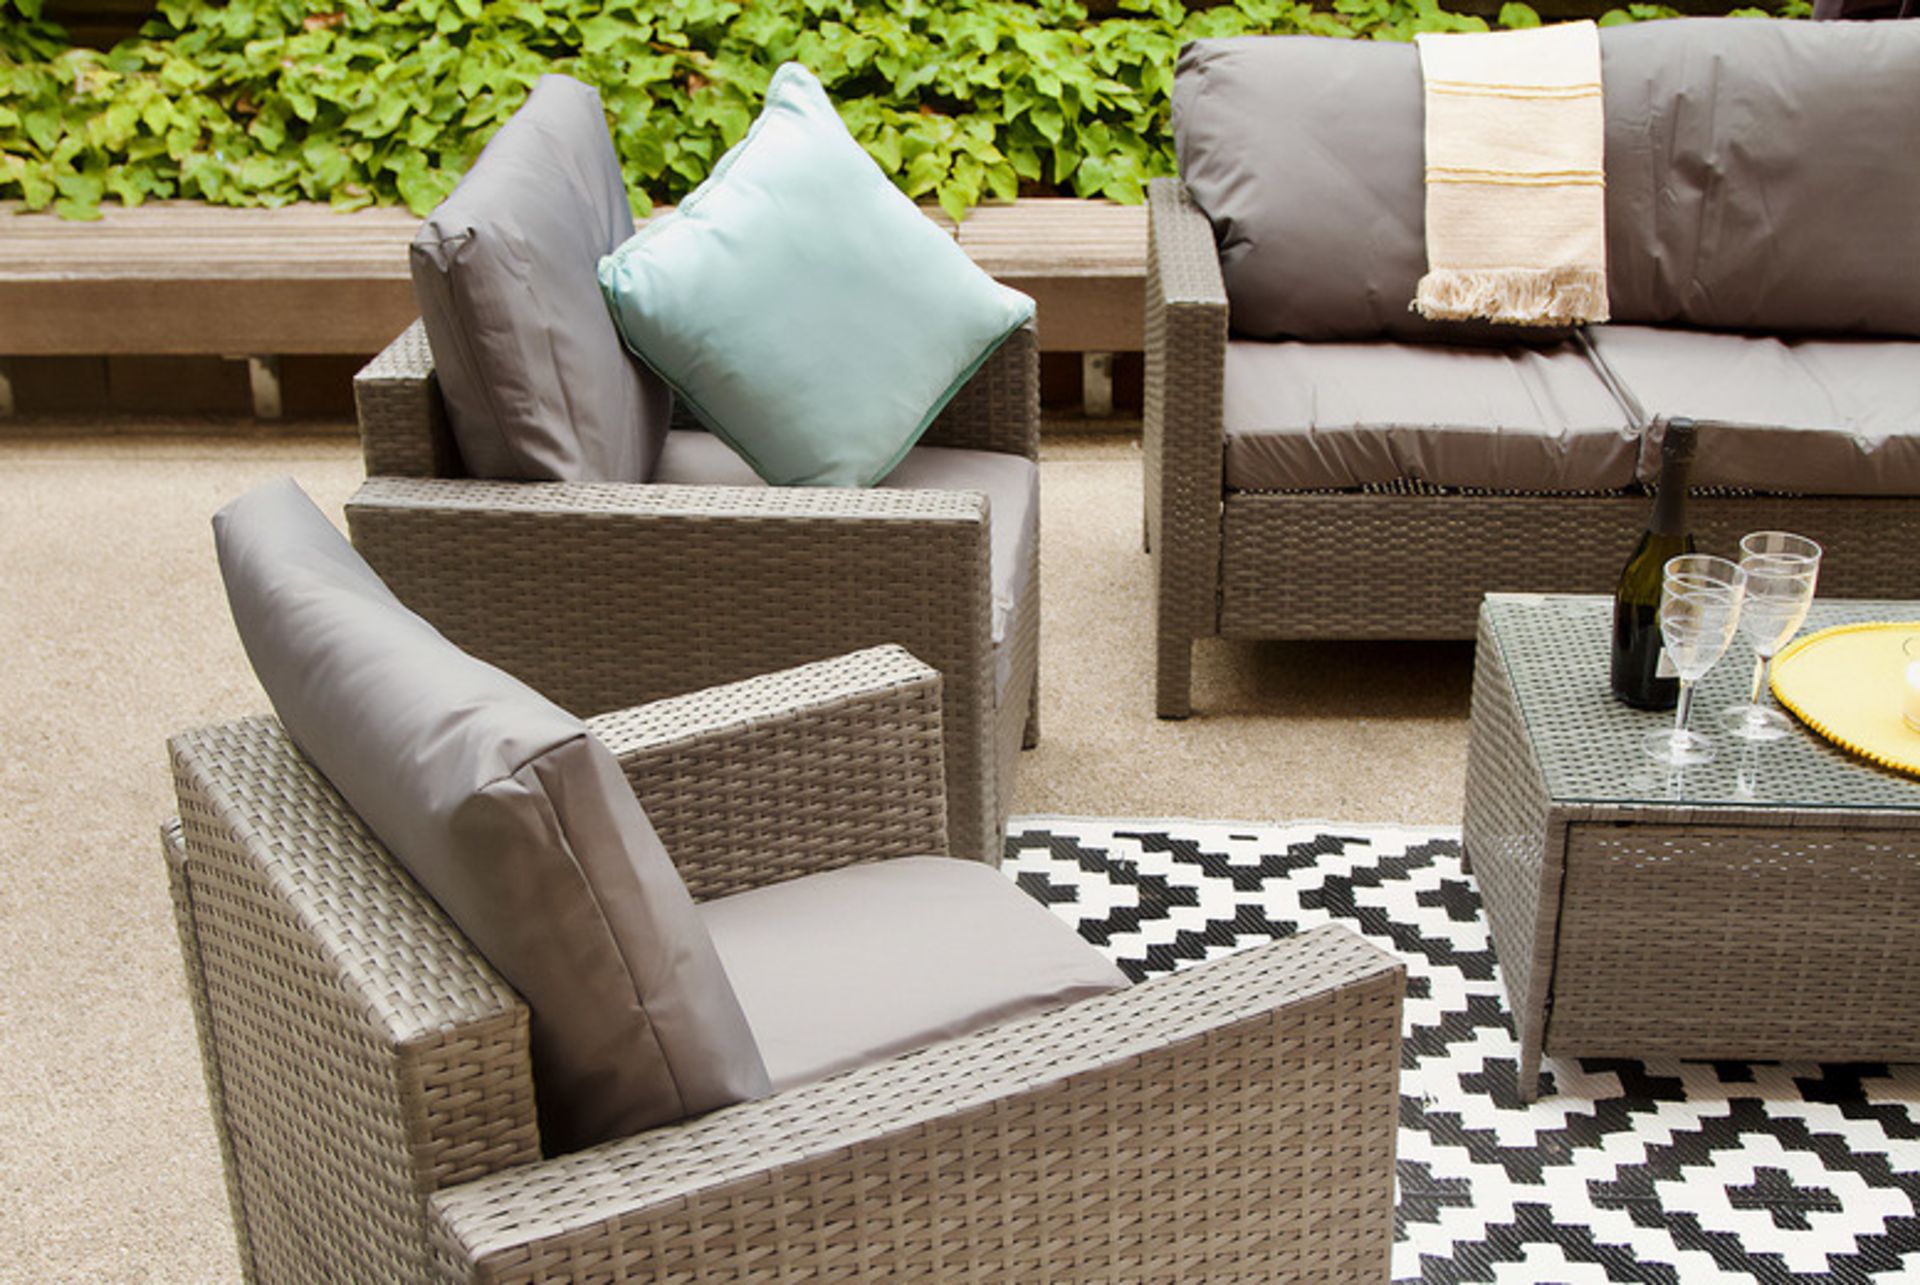 FREE DELIVERY - JOB LOT OF 5X 8-SEATER RATTAN CHAIR & SOFA GARDEN FURNITURE SET - GREY - Image 4 of 5